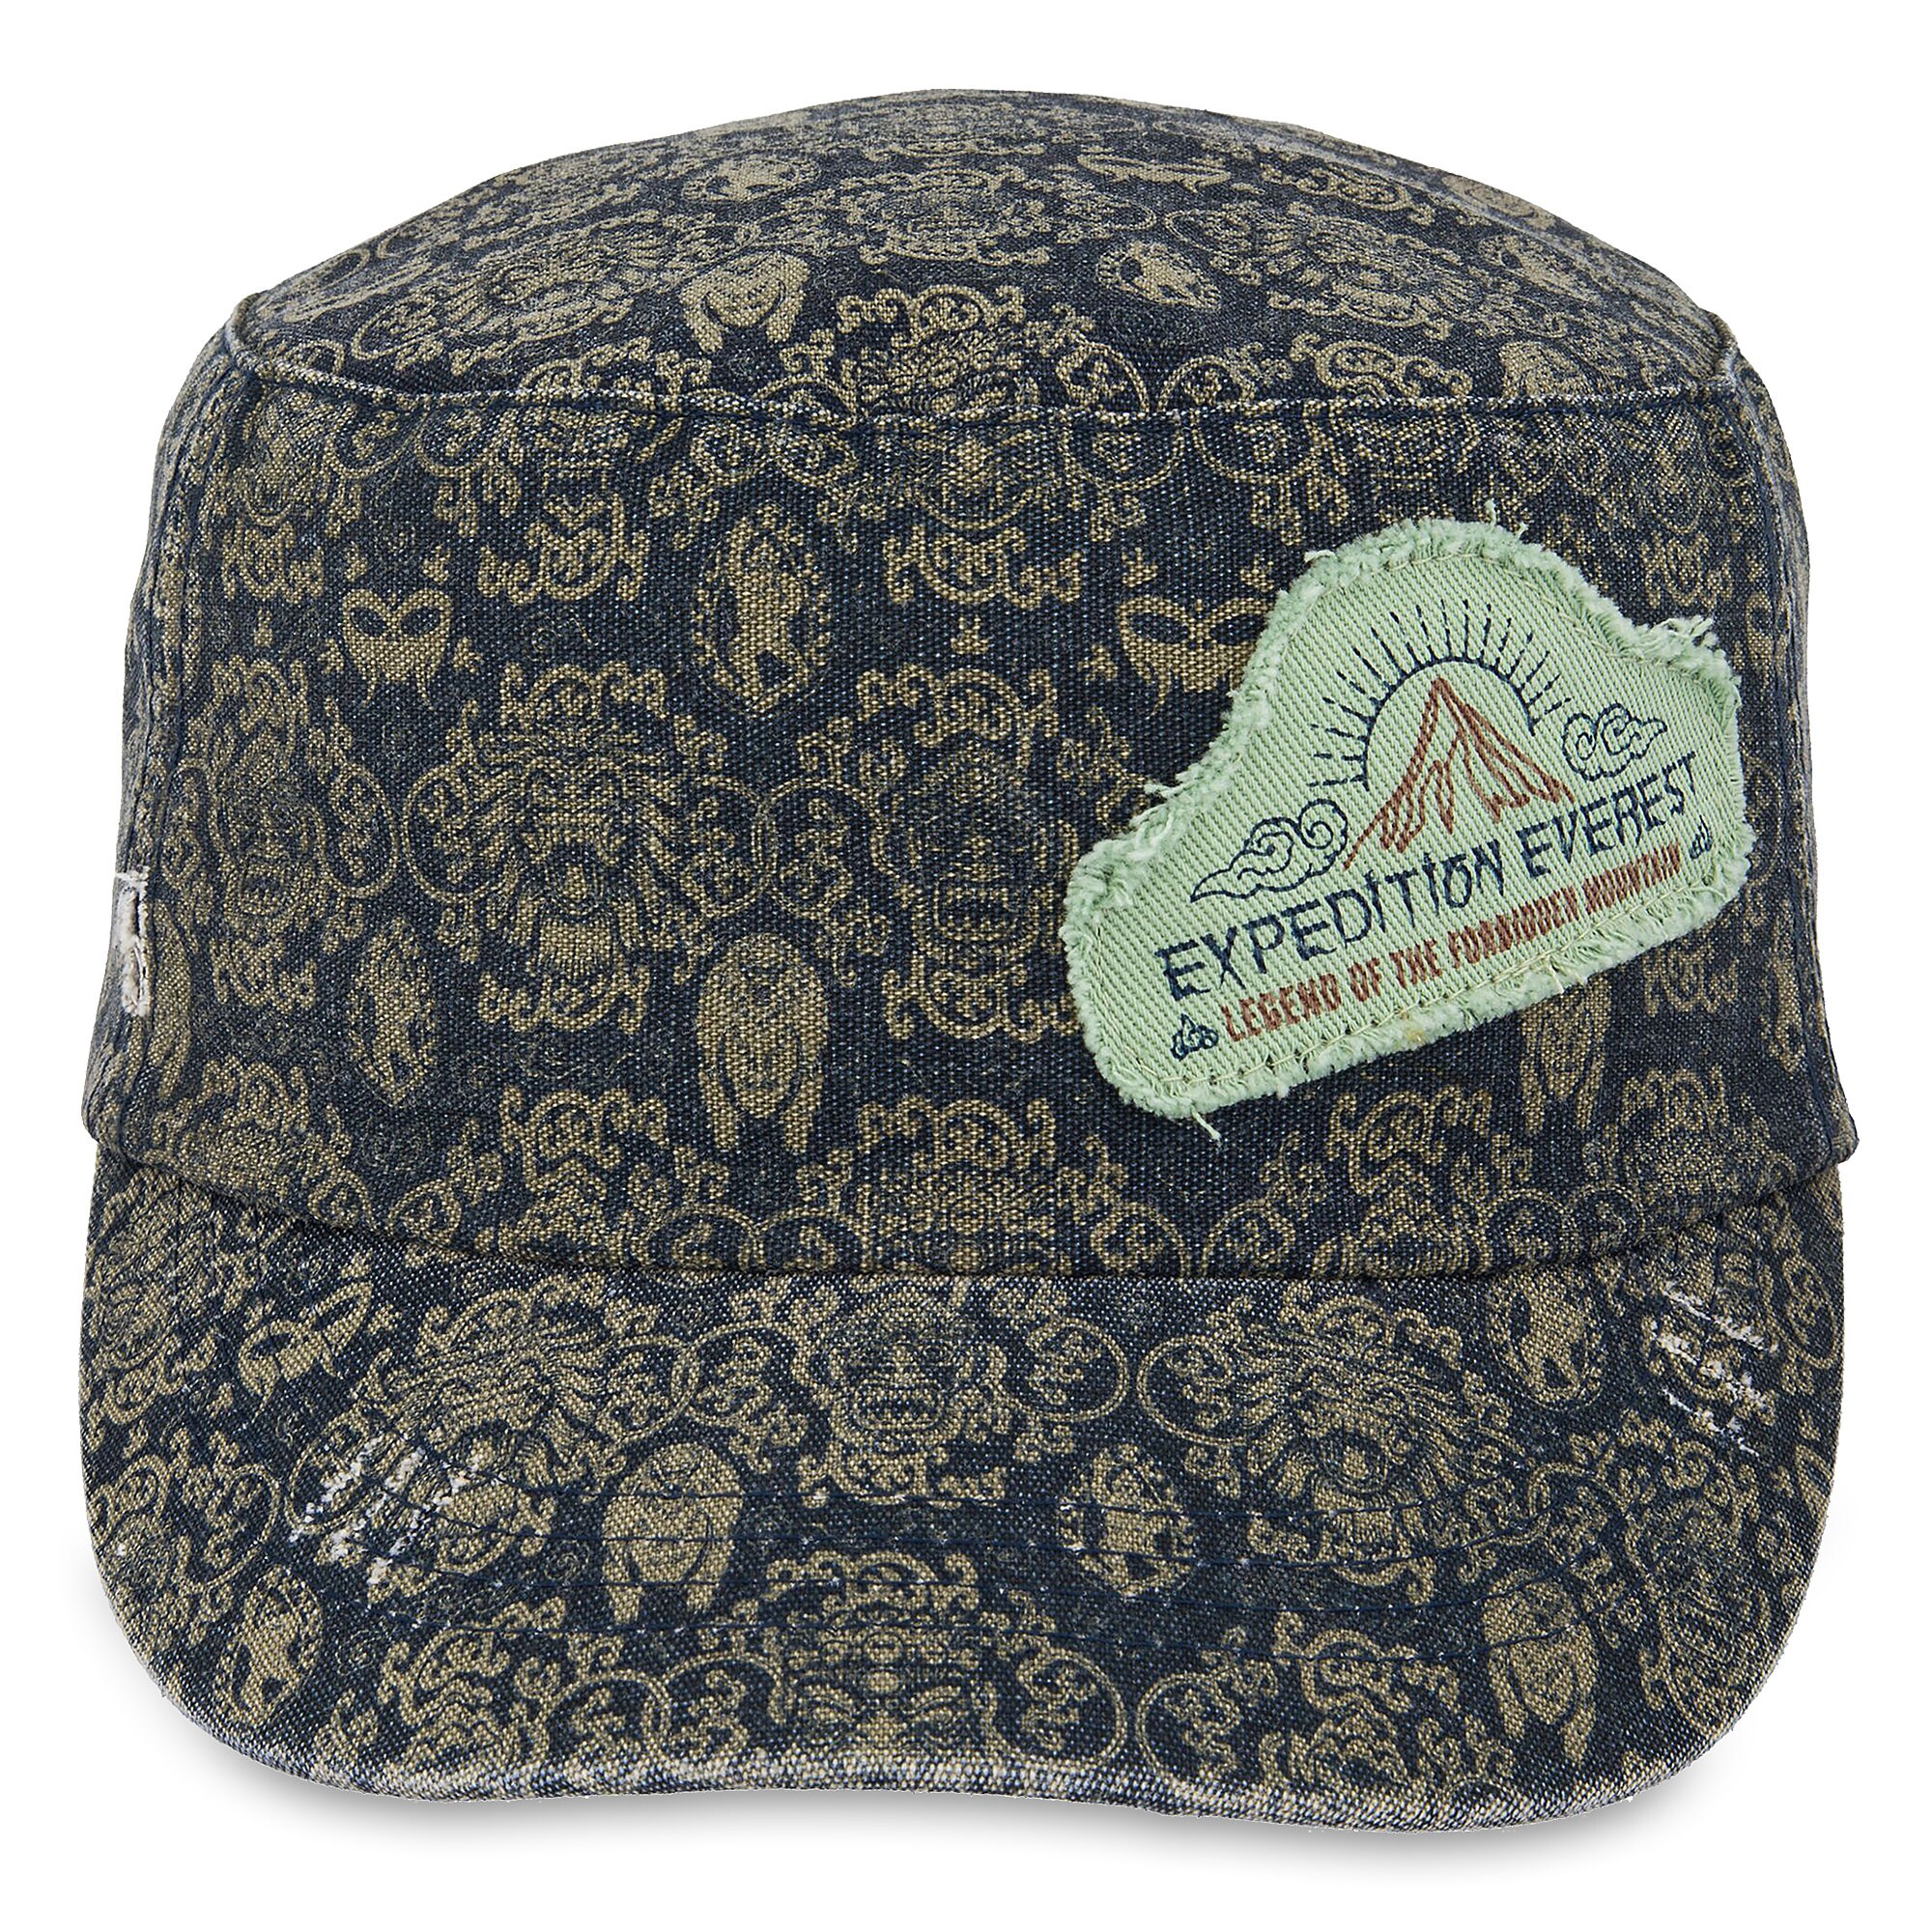 Expedition Everest Cadet Hat for Women